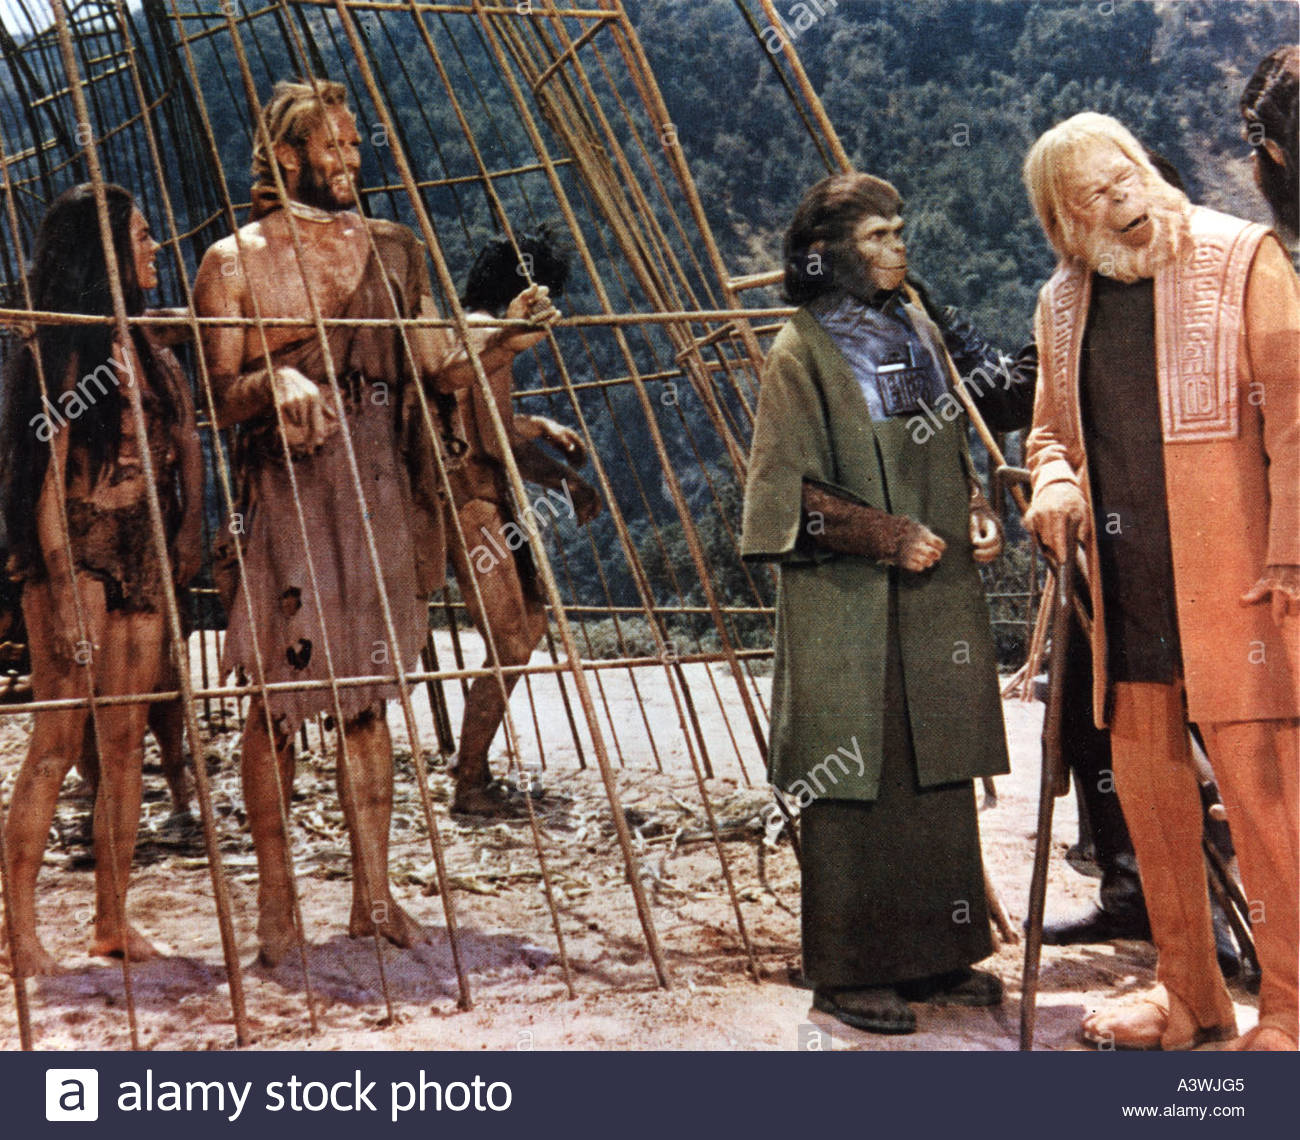 Planet Of The Apes (1968) HD wallpapers, Desktop wallpaper - most viewed